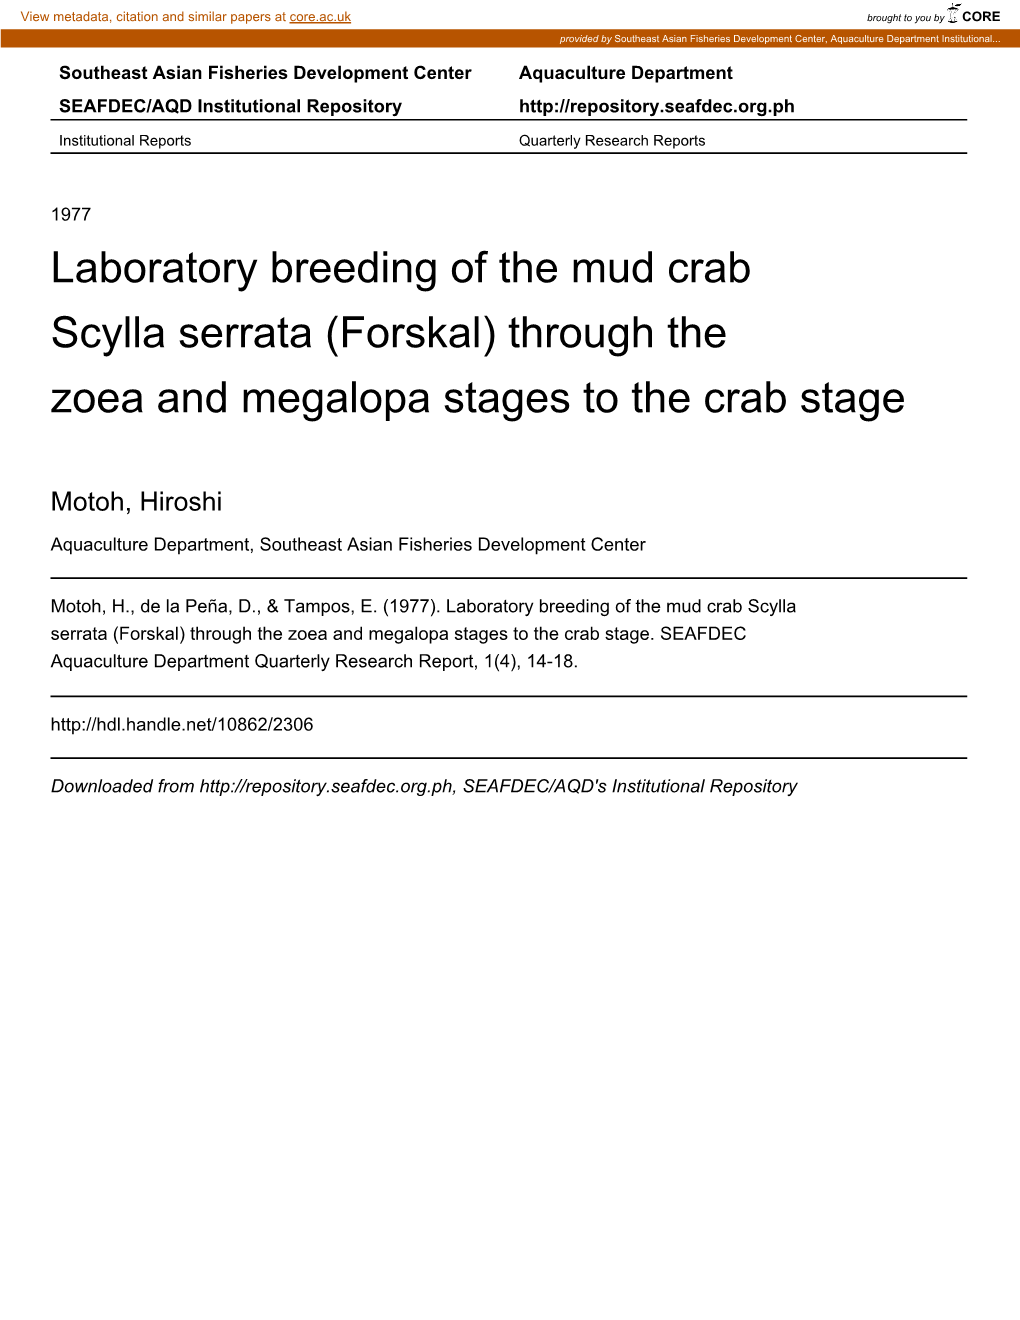 Laboratory Breeding of the Mud Crab Scylla Serrata (Forskal) Through the Zoea and Megalopa Stages to the Crab Stage